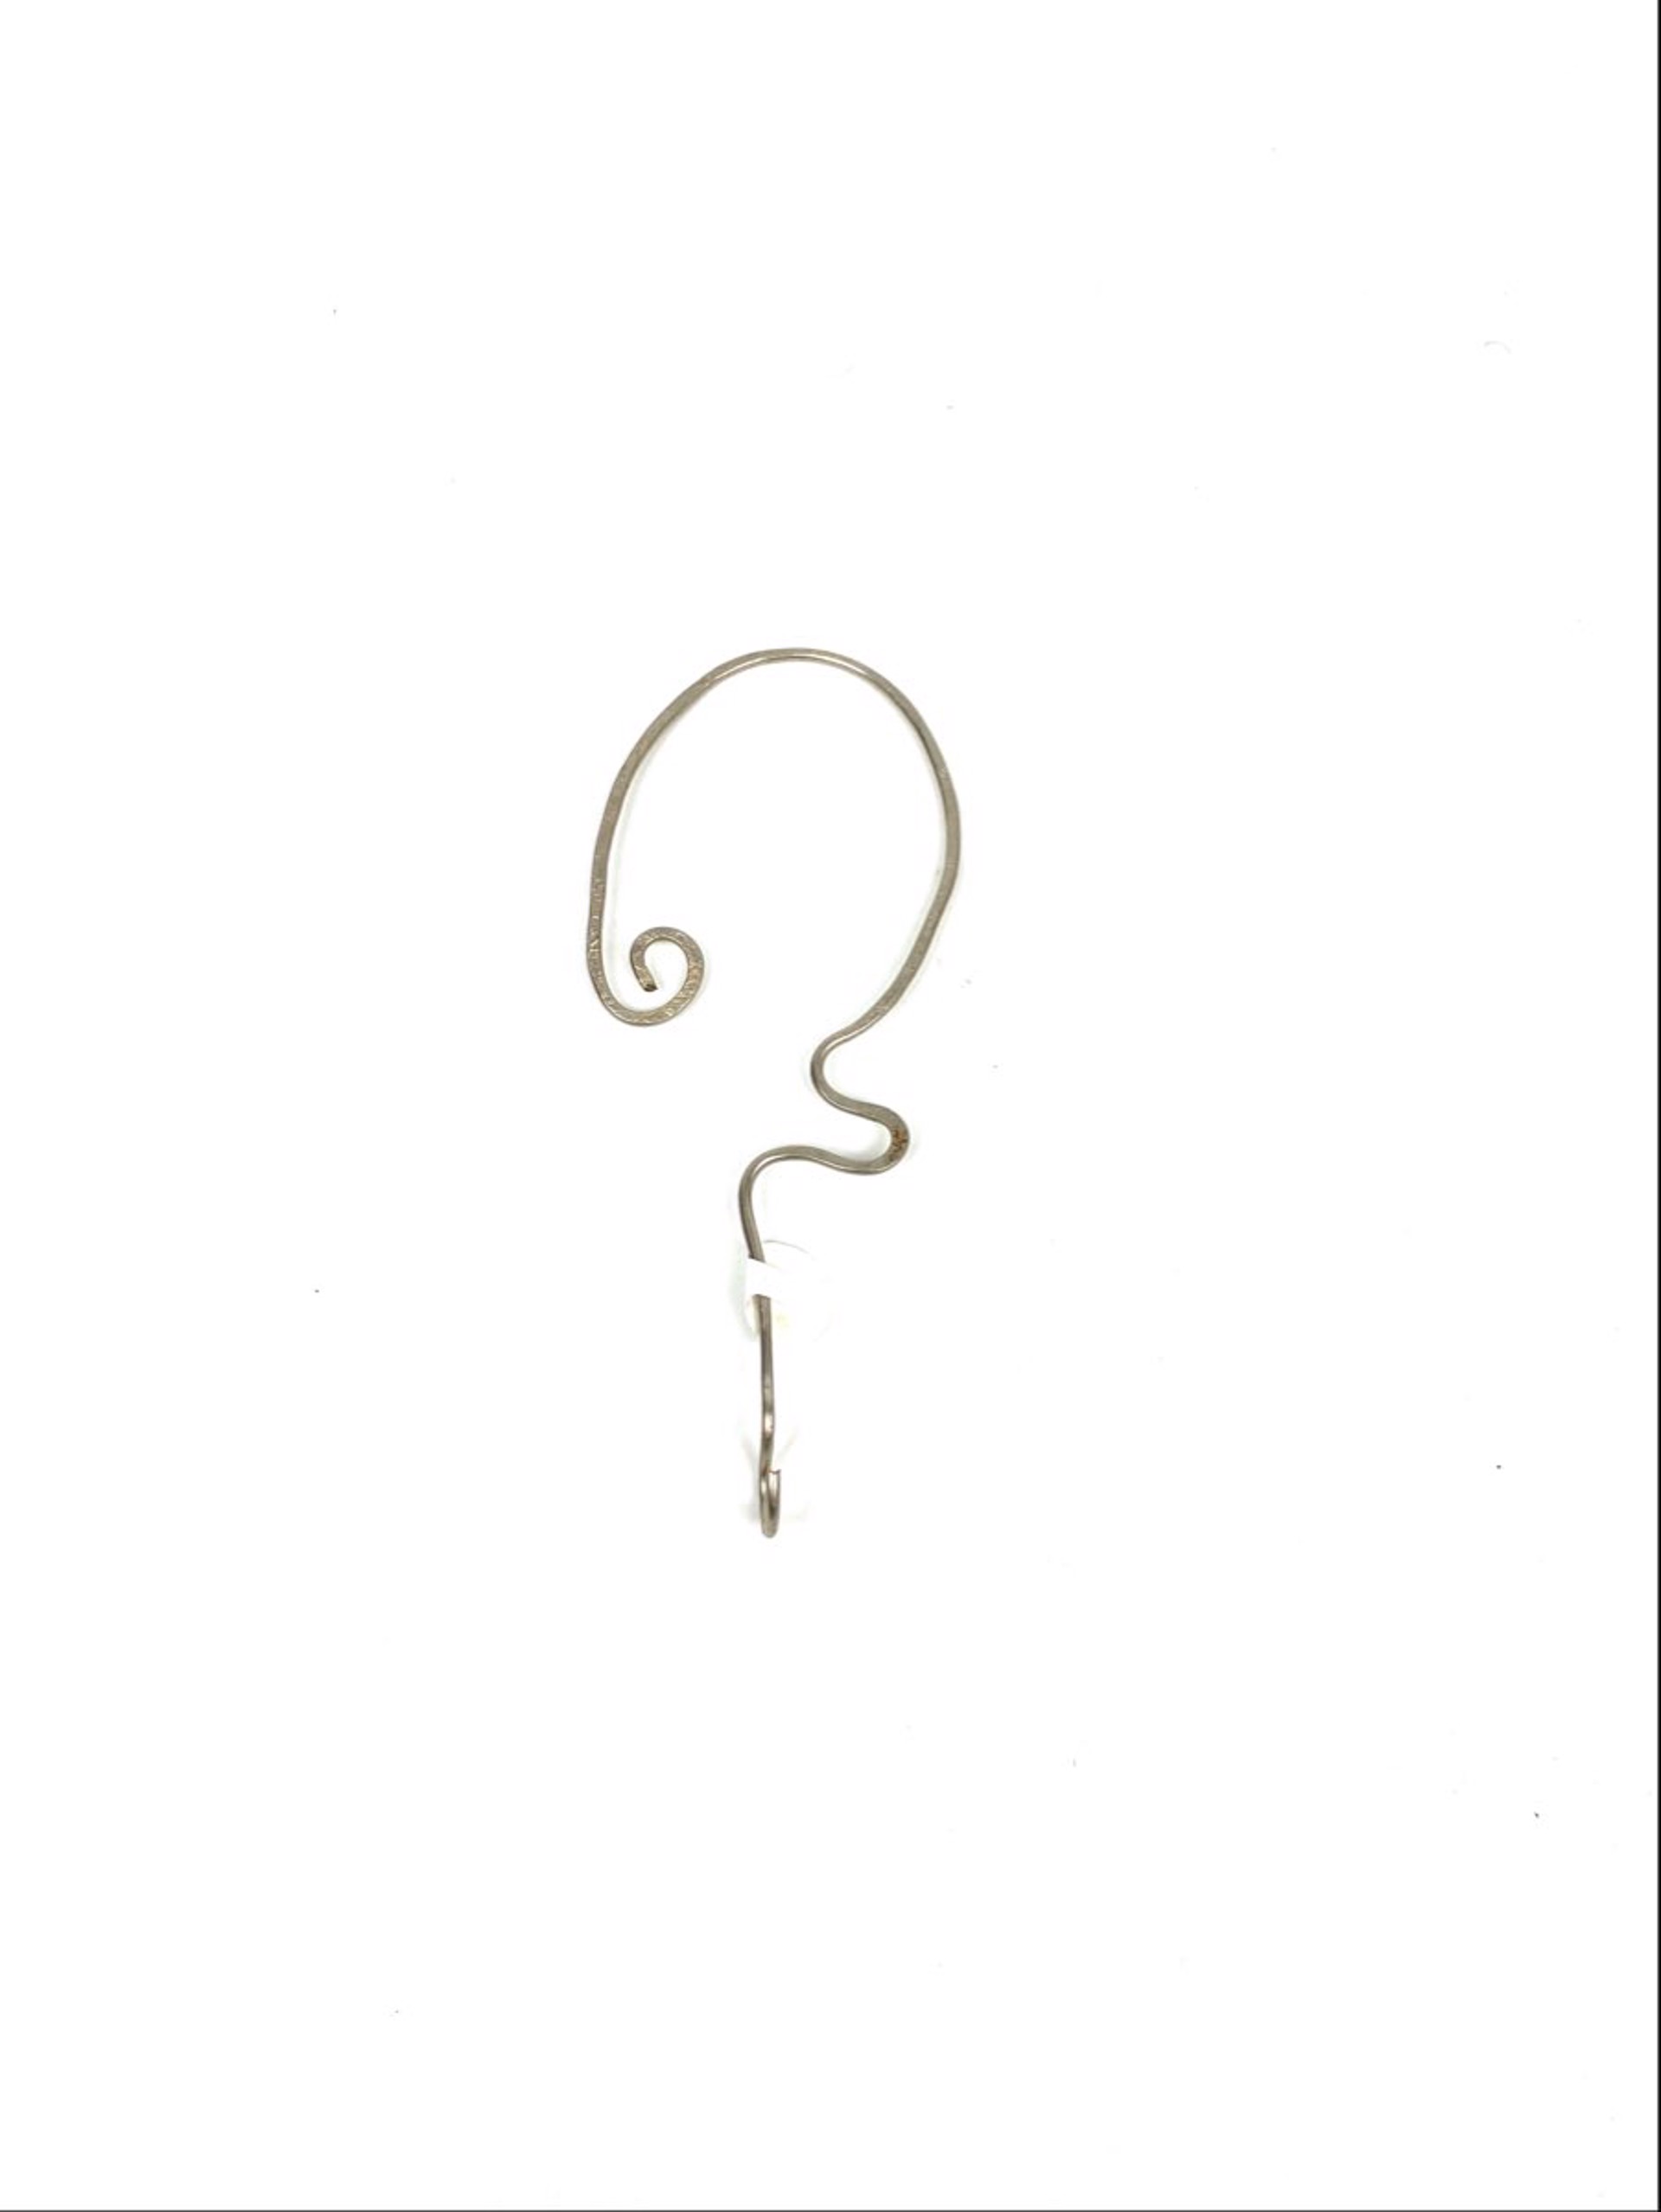 Hammered Hook by Sherry Nickell